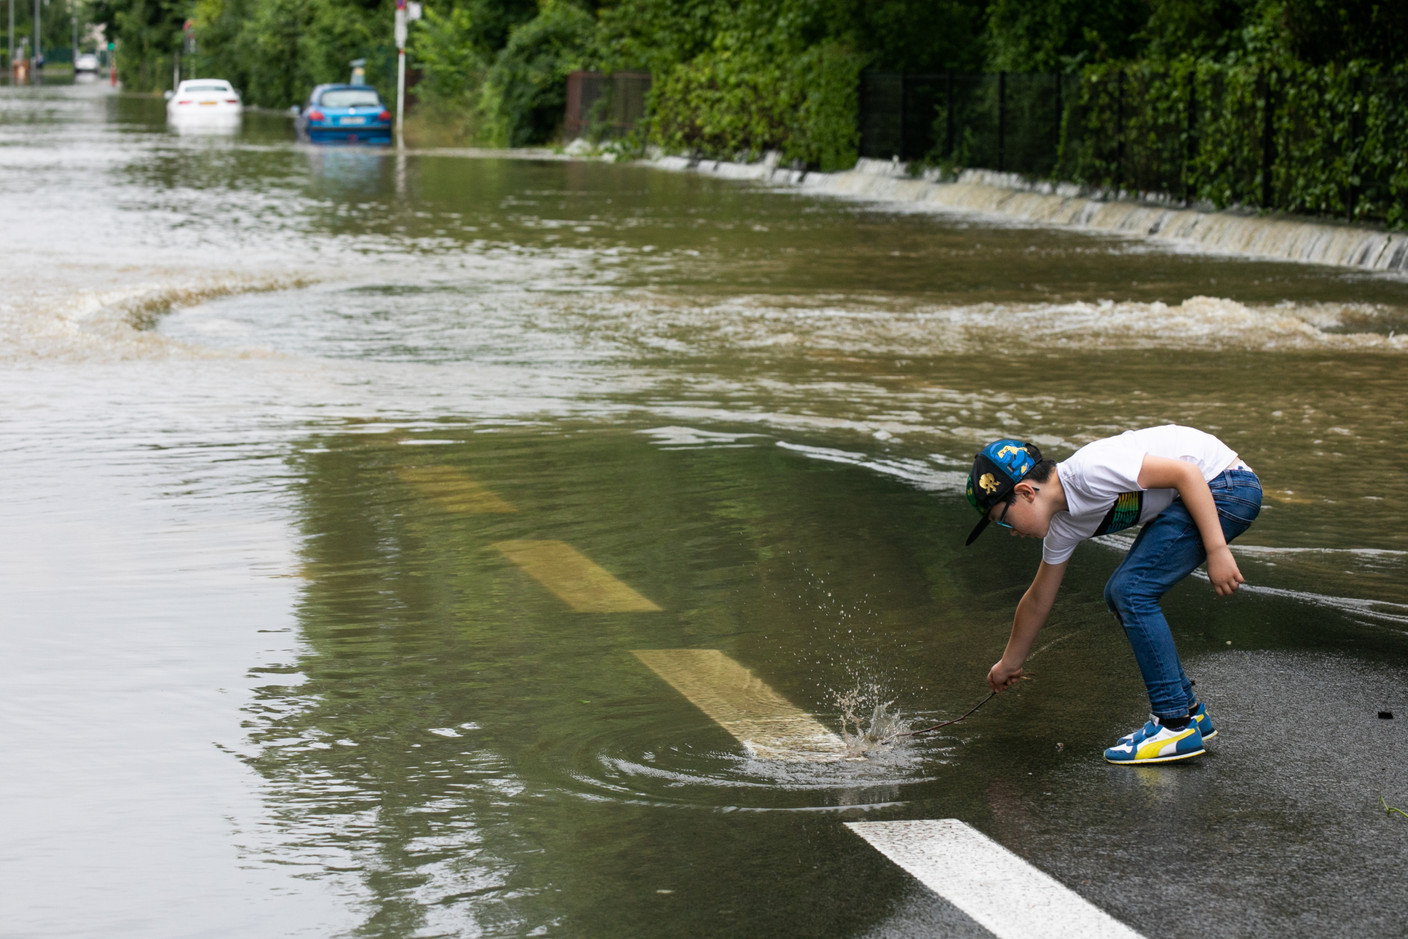 Floodwaters are seen in the capital’s Beggen district, 15 July 2021. Matic Zorman / Maison Moderne